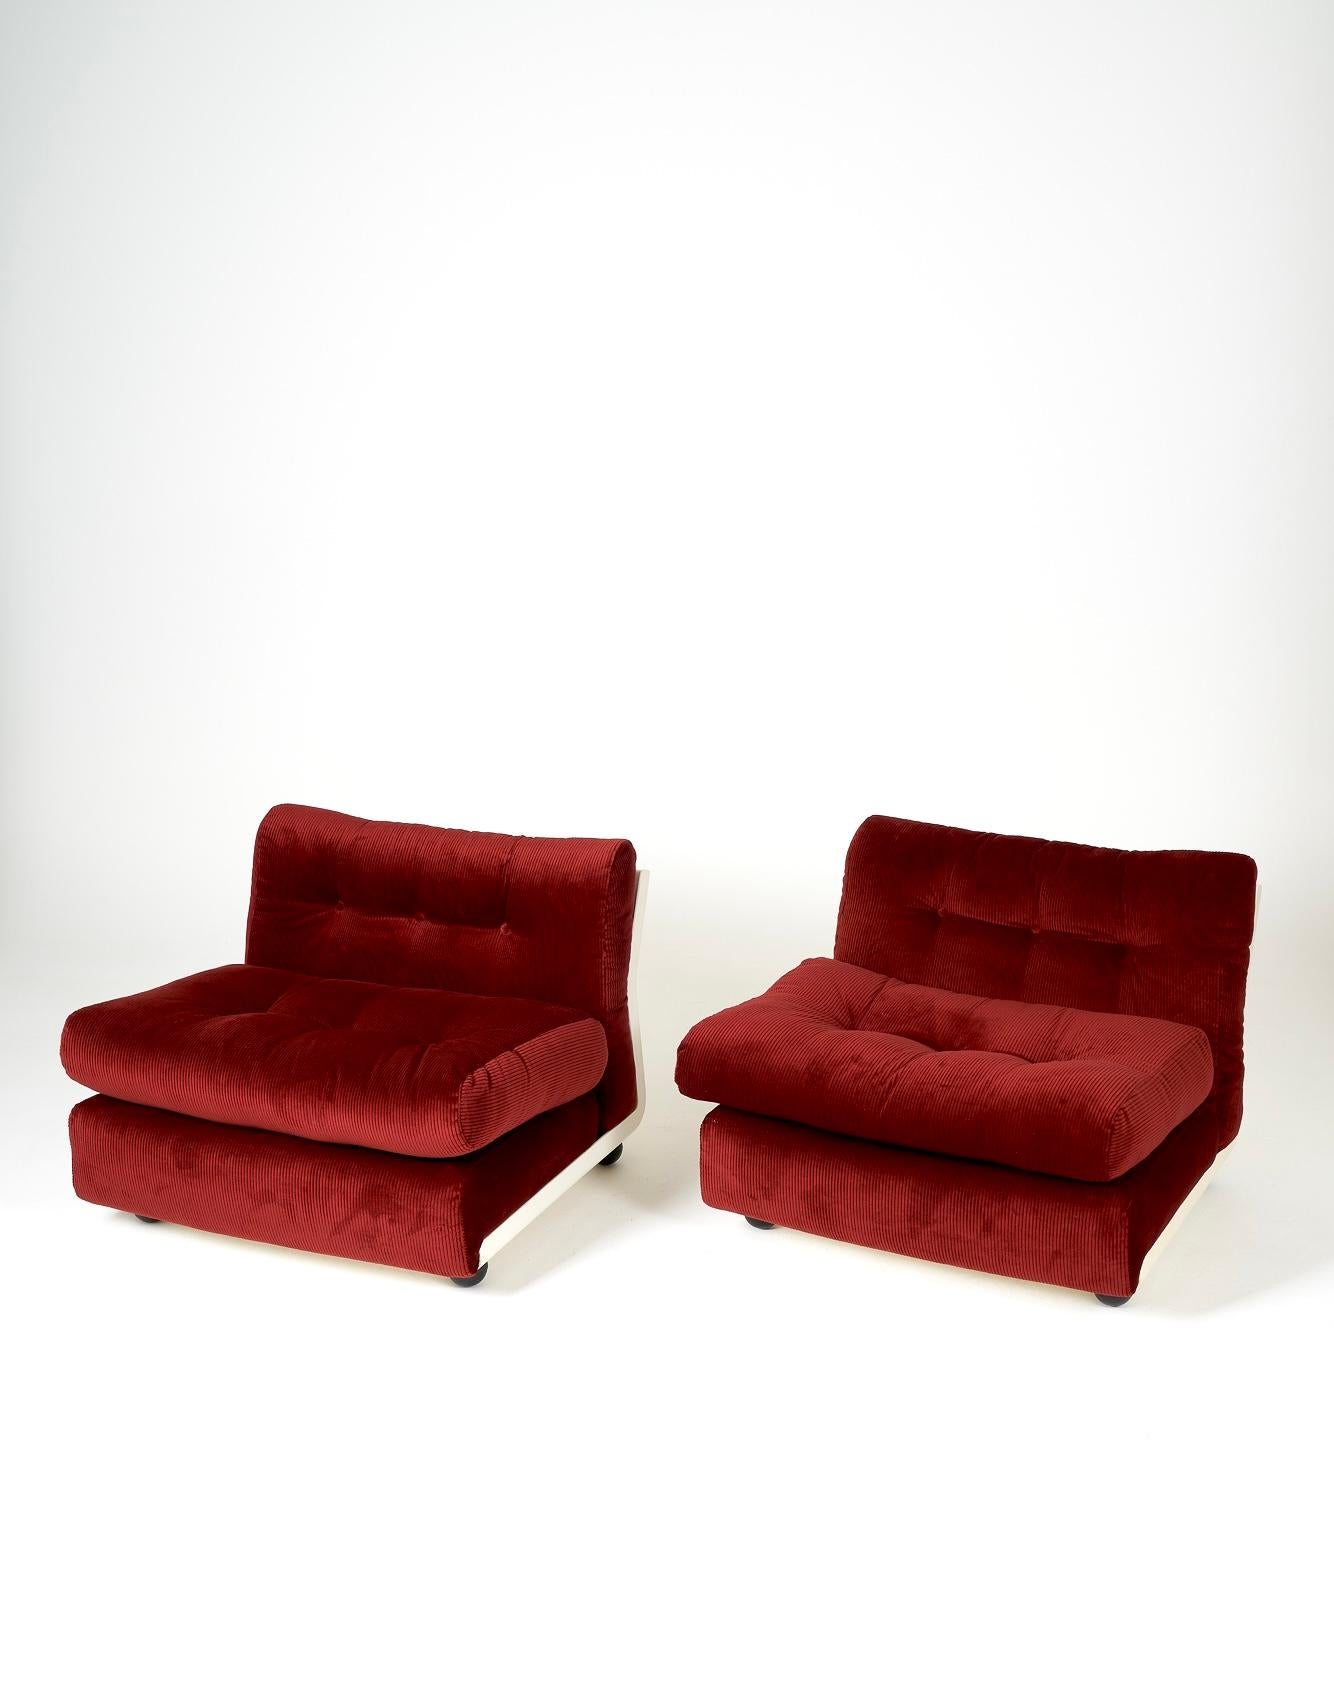 Amanta armchair by designer Mario Bellini. Published by C&B Italia in the 1970s. Fiberglass shell, and seat and backrest reupholstered in high-quality corduroy velvet. Rare in this condition. Two armchairs available.
LP238-239